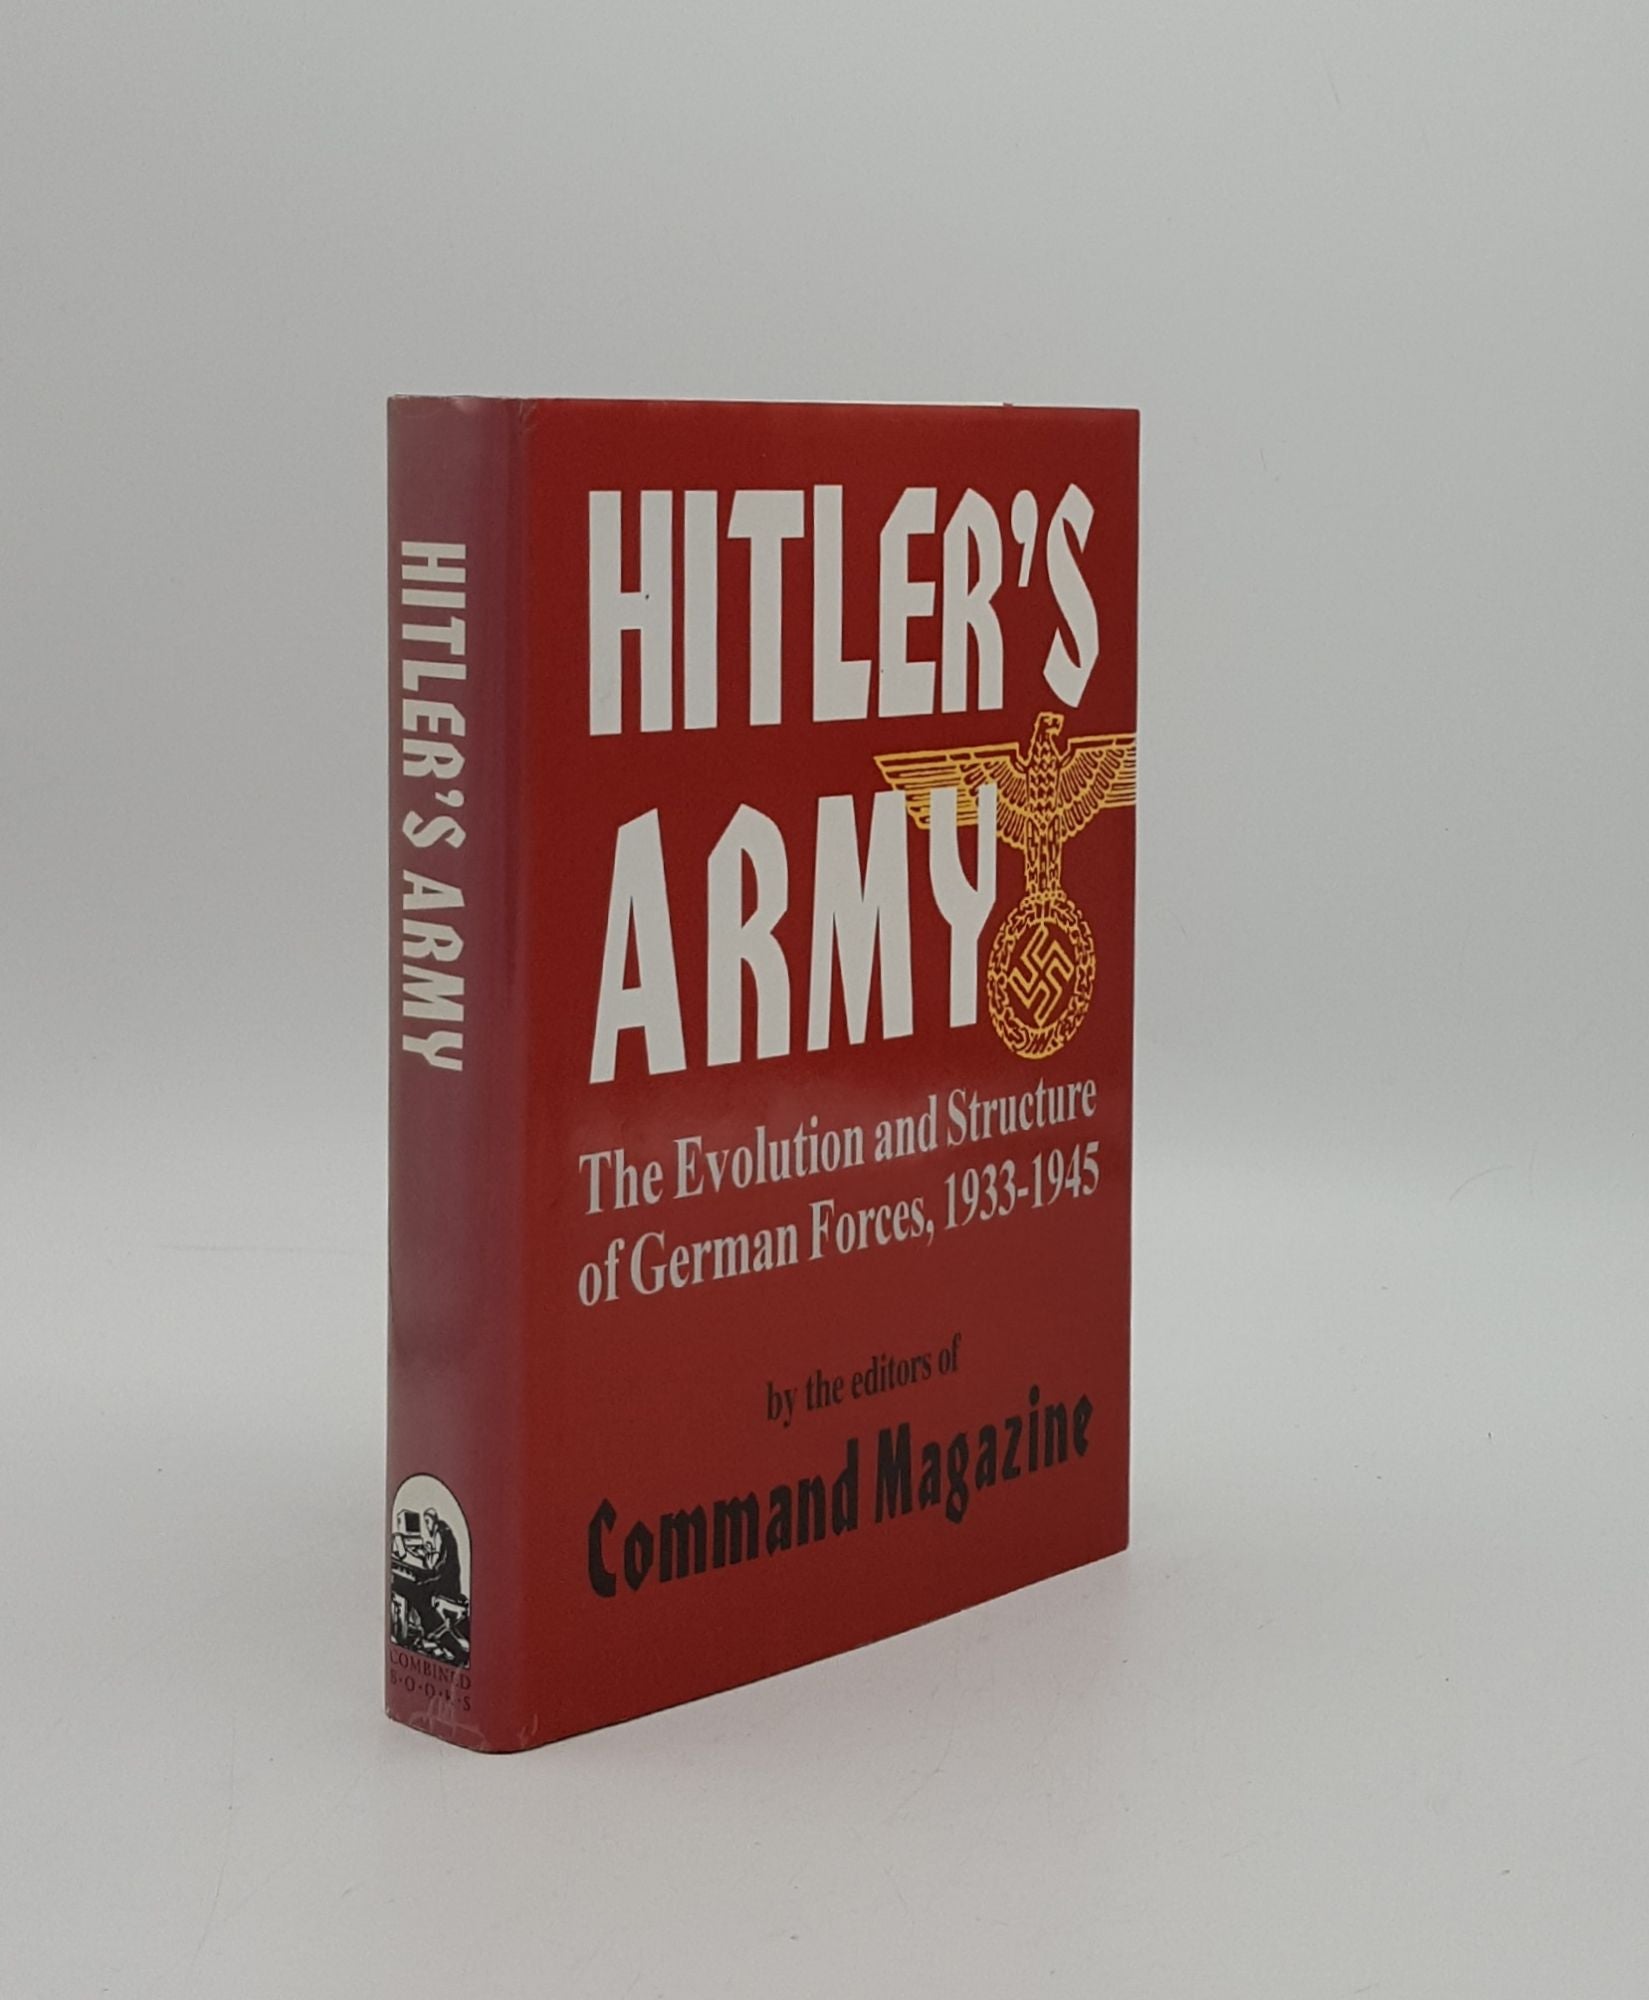 BOMBA Ty, PERELLO Chris - Hitler's Army the Evolution and Structure of German Forces 1933-1945